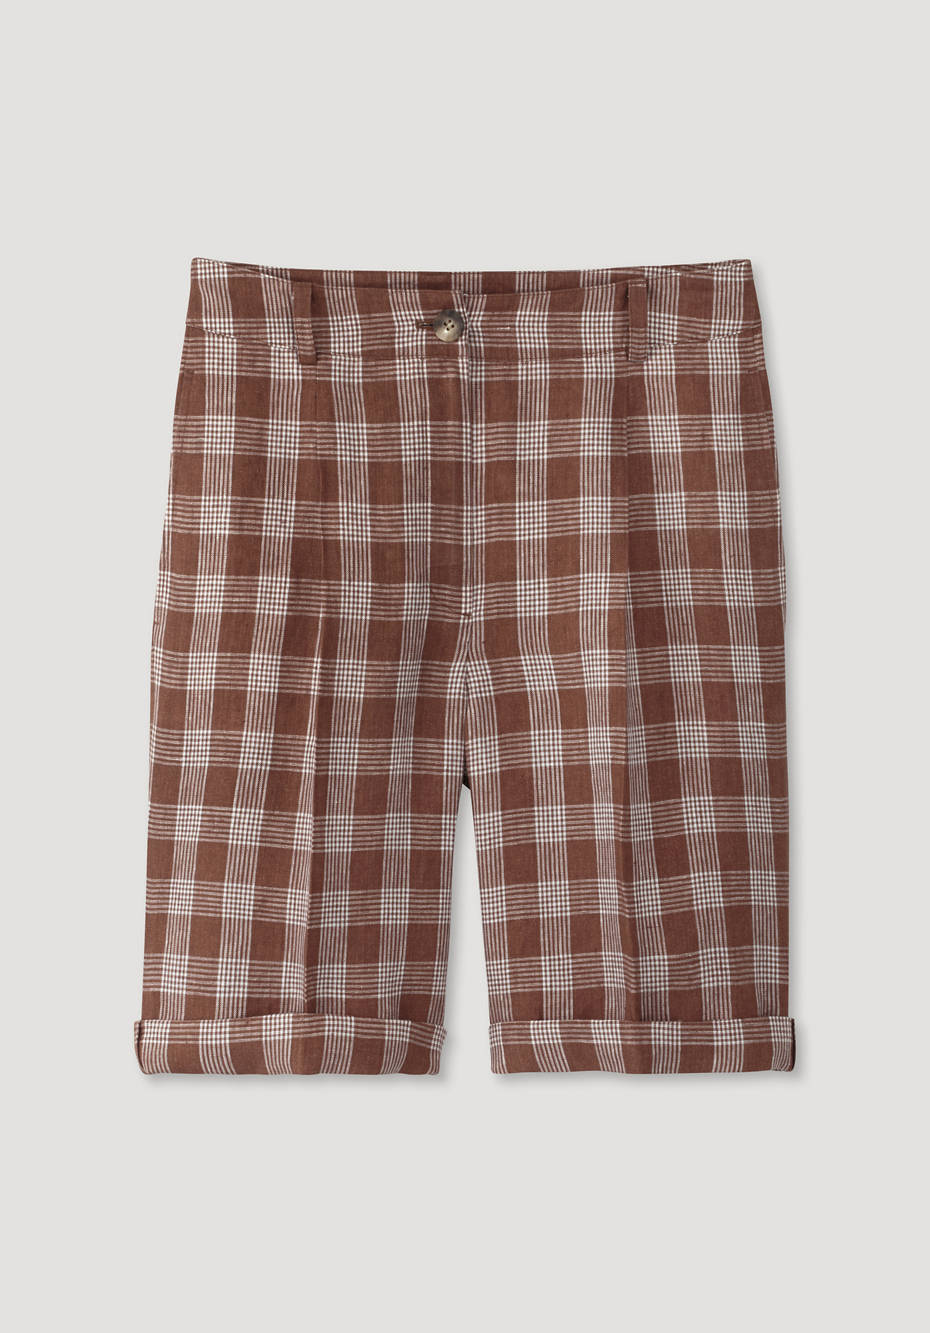 Checked shorts made from pure organic linen